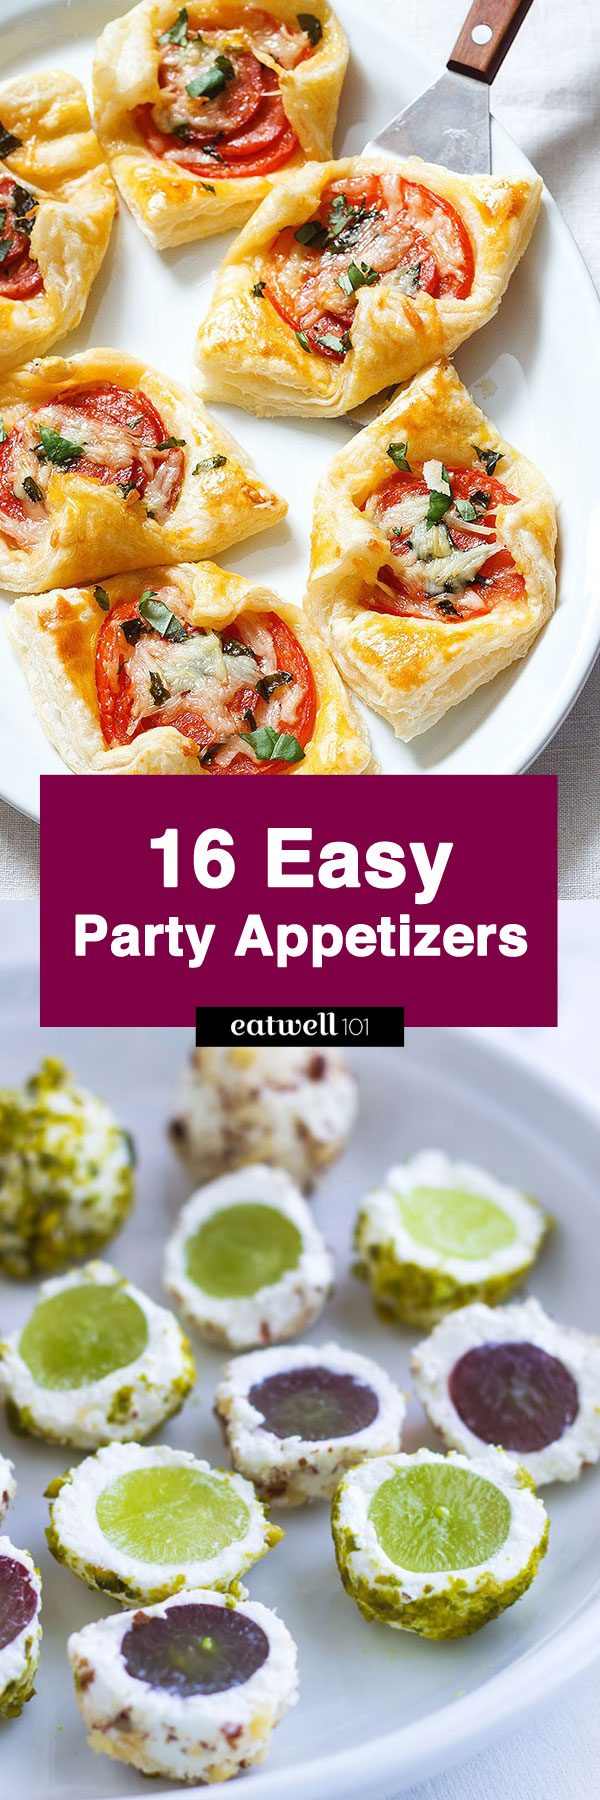 Appetizers for Party: 17 Delicious and Easy Recipes — Eatwell101